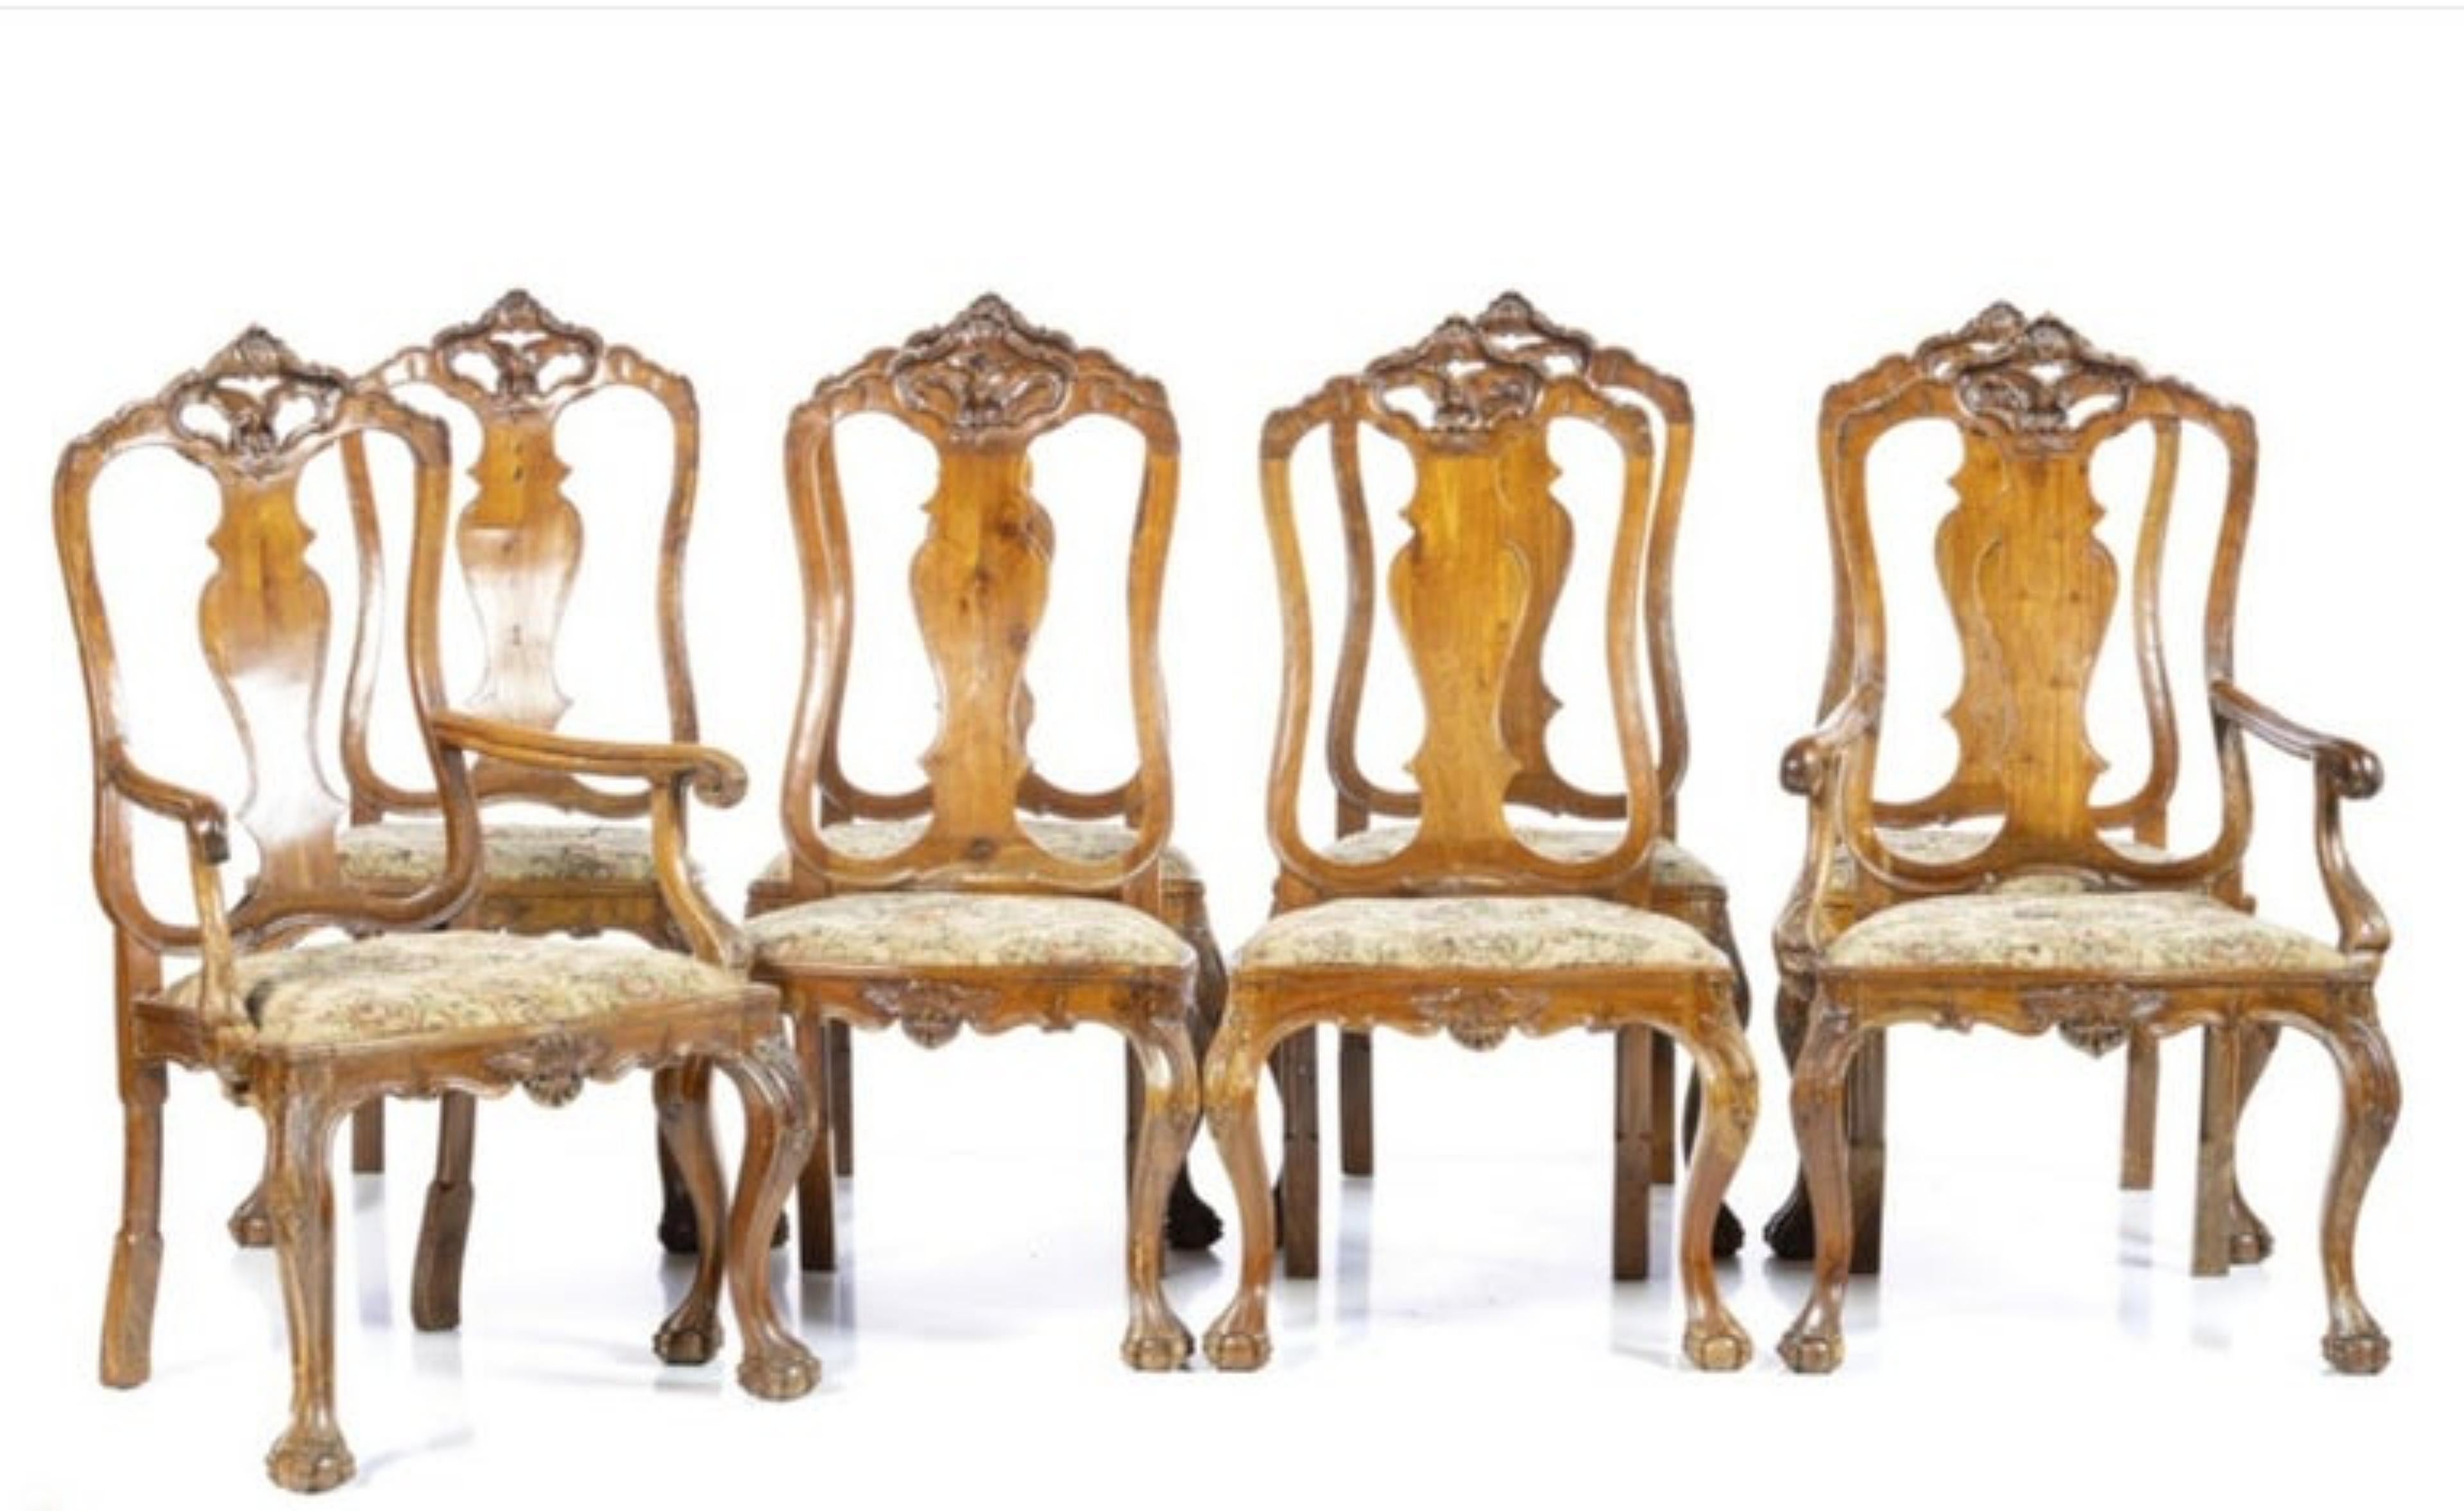 SET OF SIX CHAIRS AND TWO CHAIRS

Portuguese D. João V, 18th Century
in carved walnut wood.
Upholstered seats.
Dim.: (chair) 110 x 64 x 49 cm
good conditions.